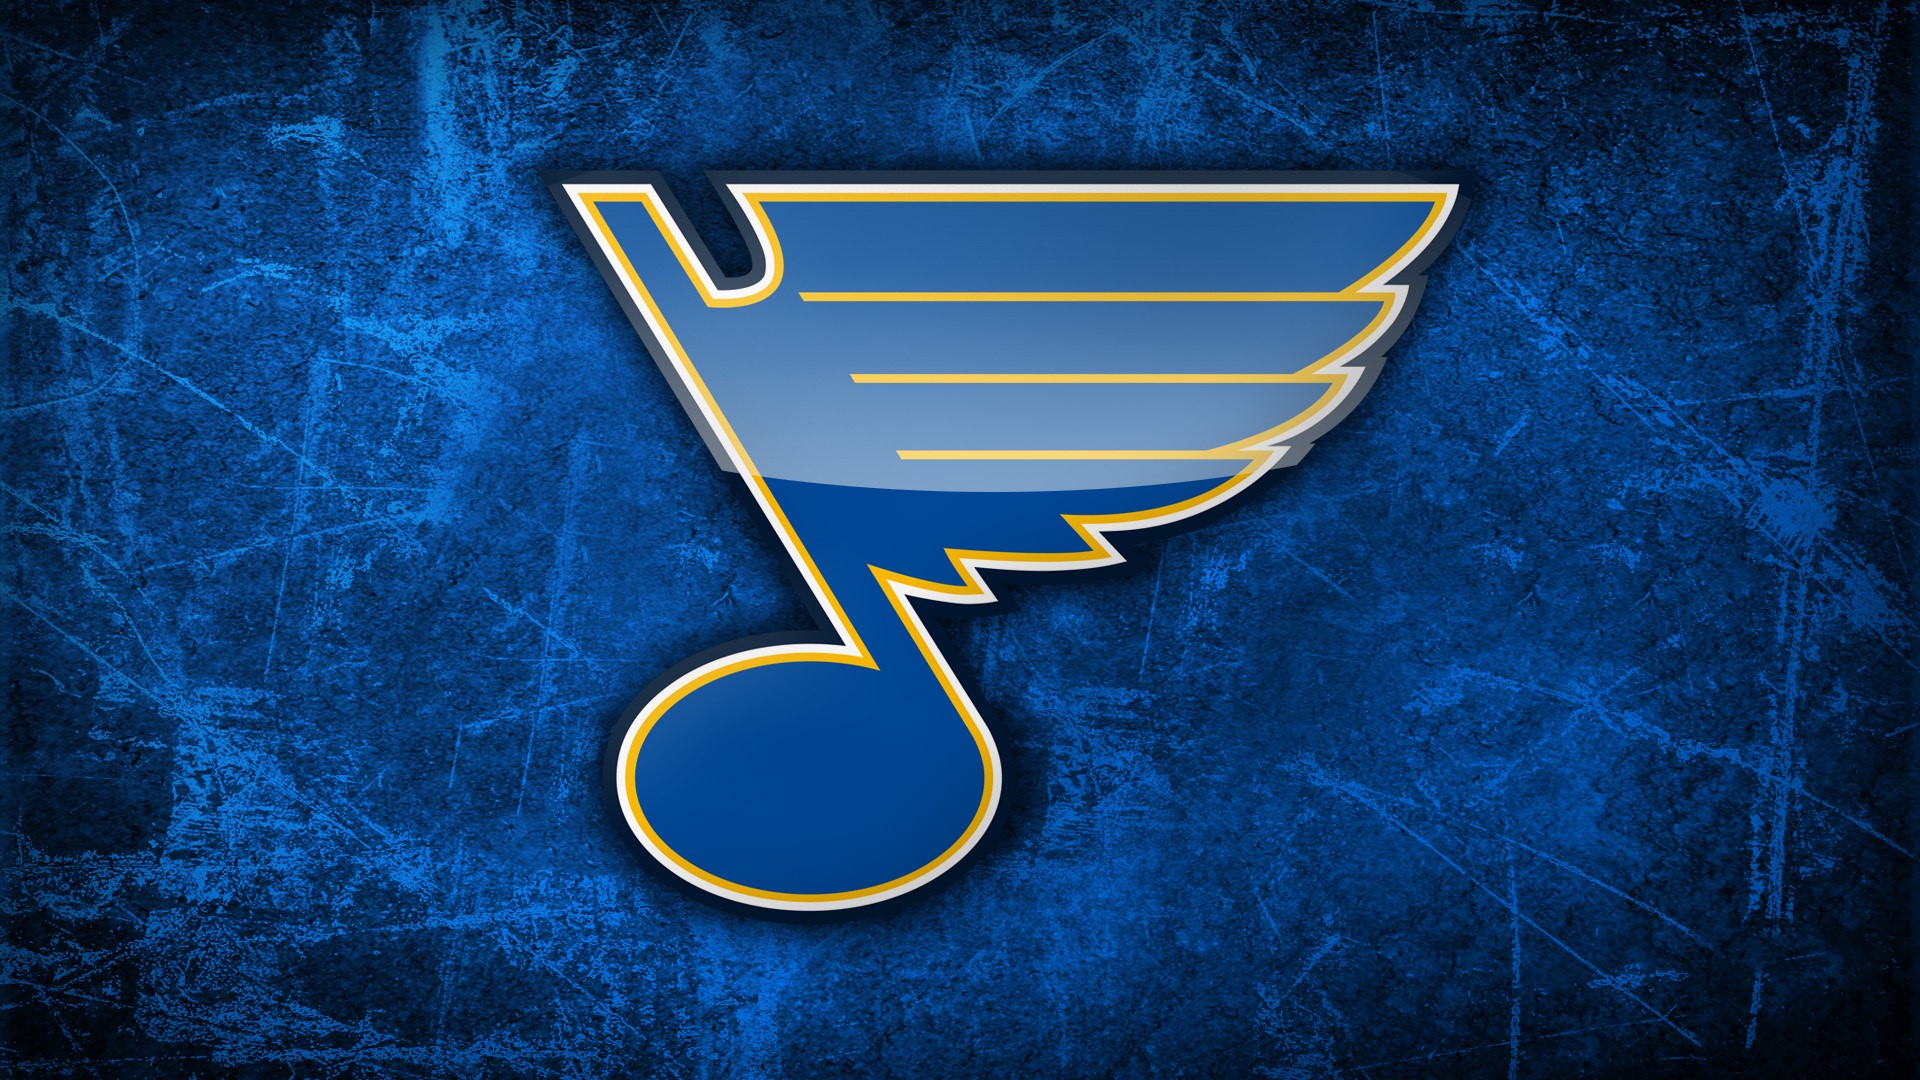 4 St. Louis Blues HD Wallpapers Backgrounds - Wallpaper Abyss